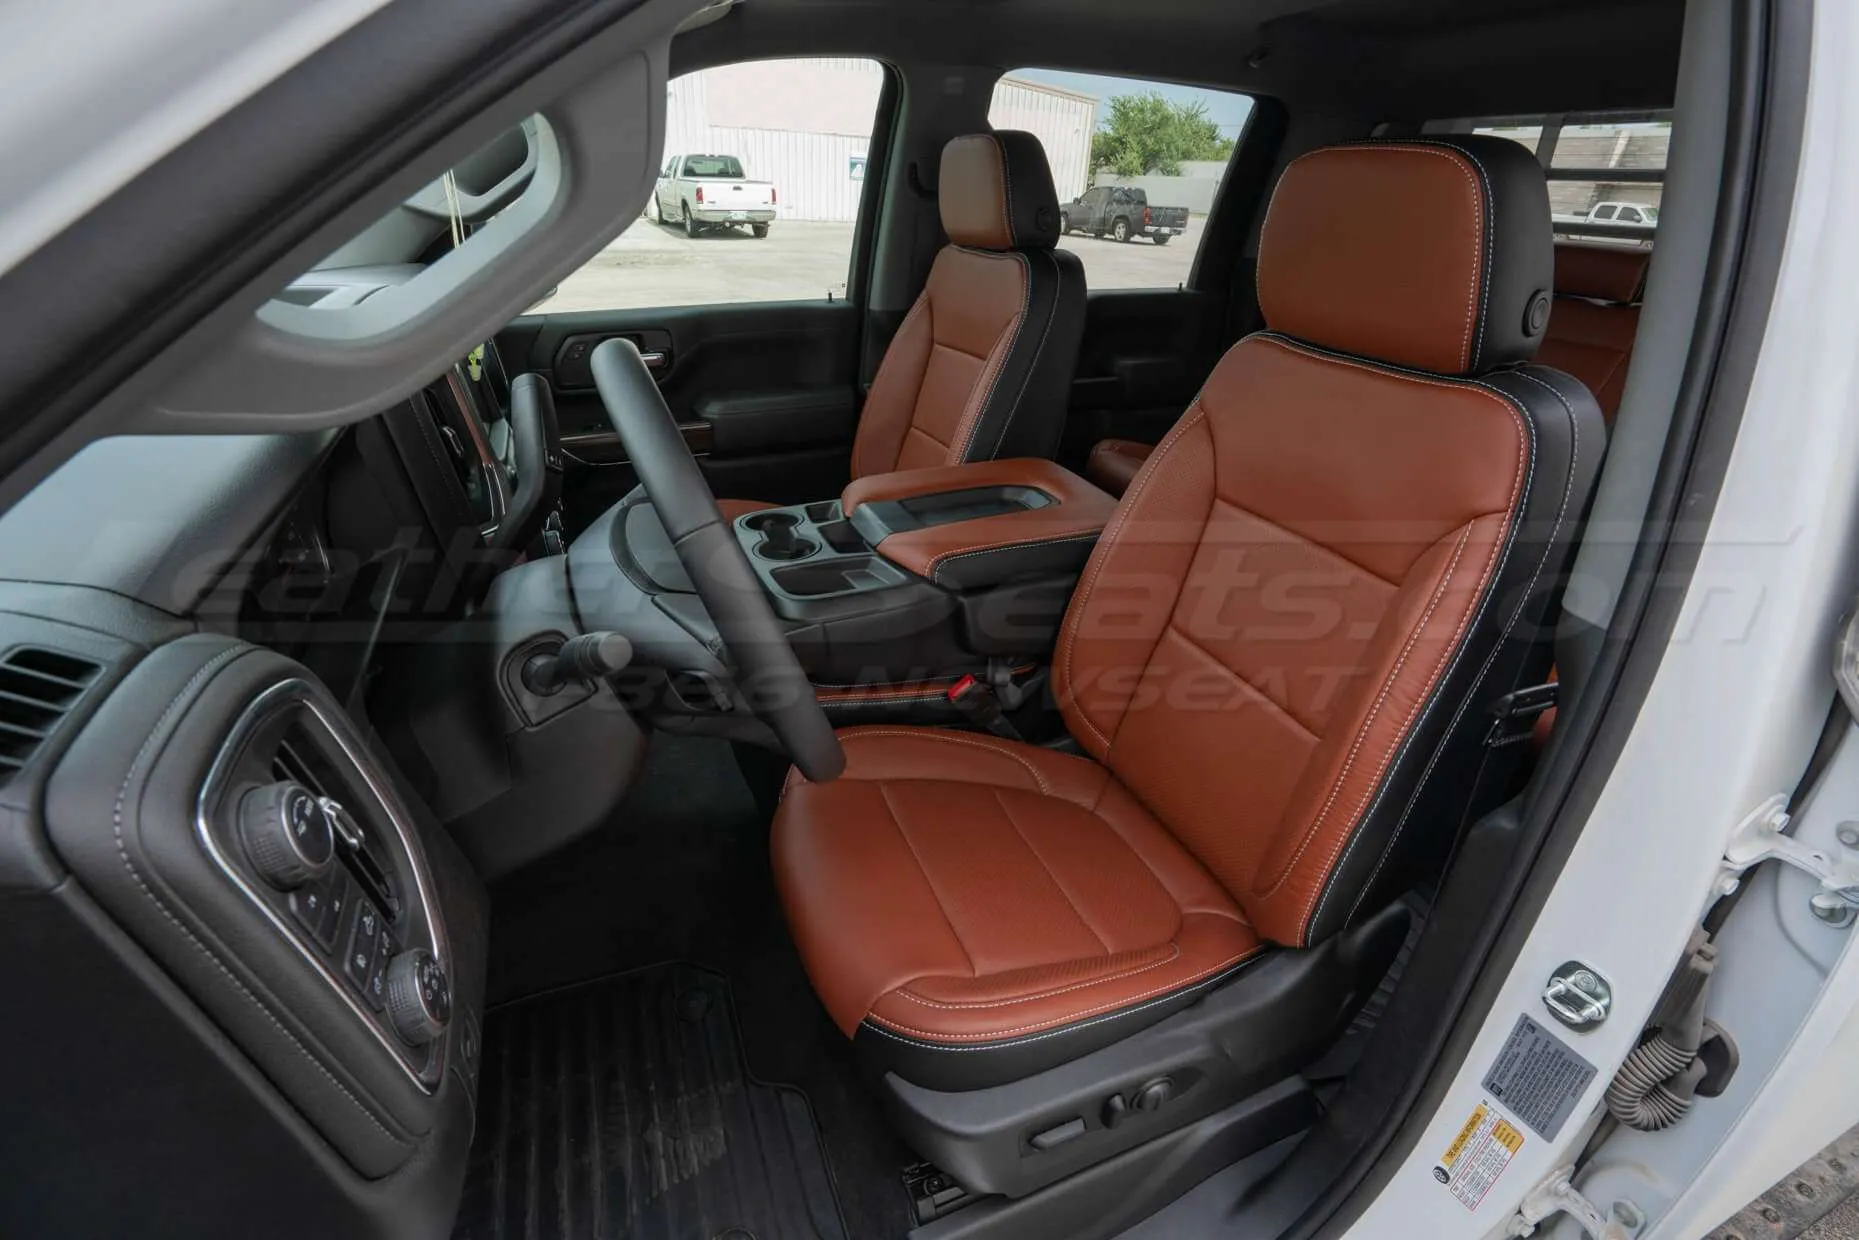 Chevy Silverado Installed Leather Seats - Front driver seat alternative angle